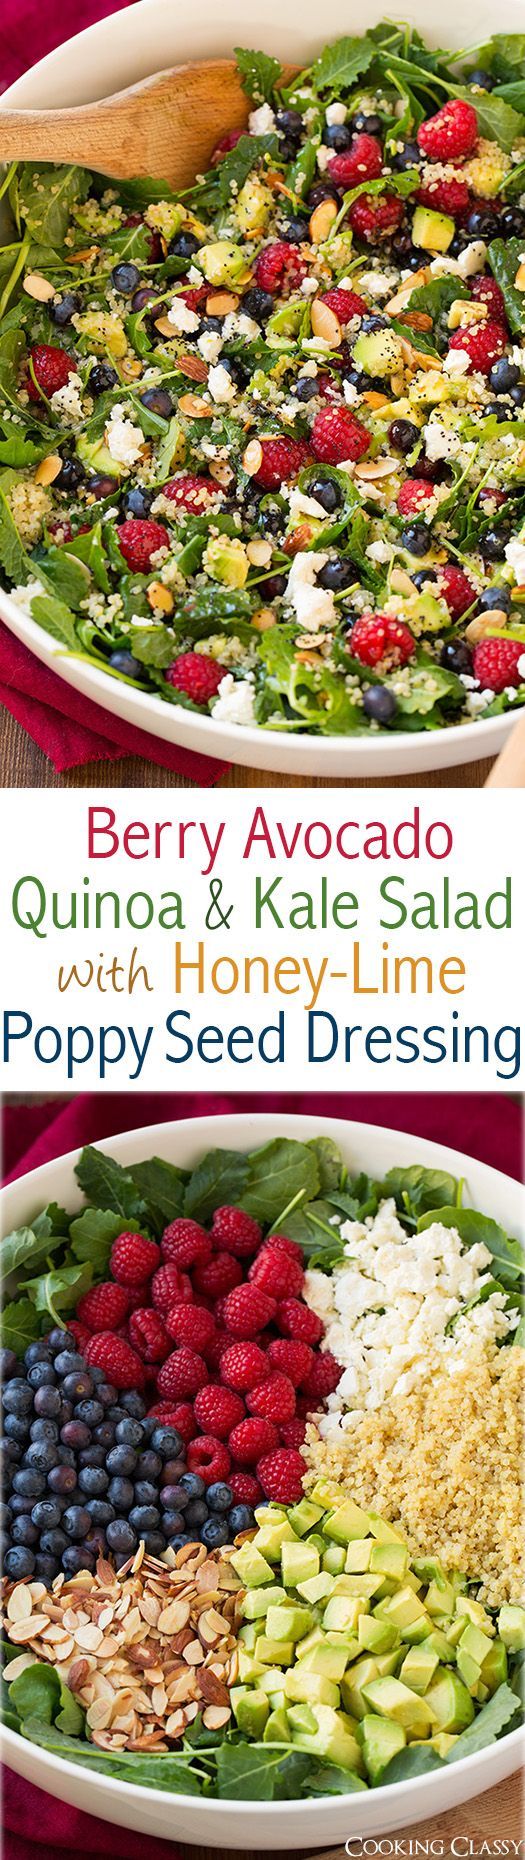 Berry Avocado Quinoa and Kale Salad with Honey-Lime Poppy Seed Dressing – a healthy superfood salad that i